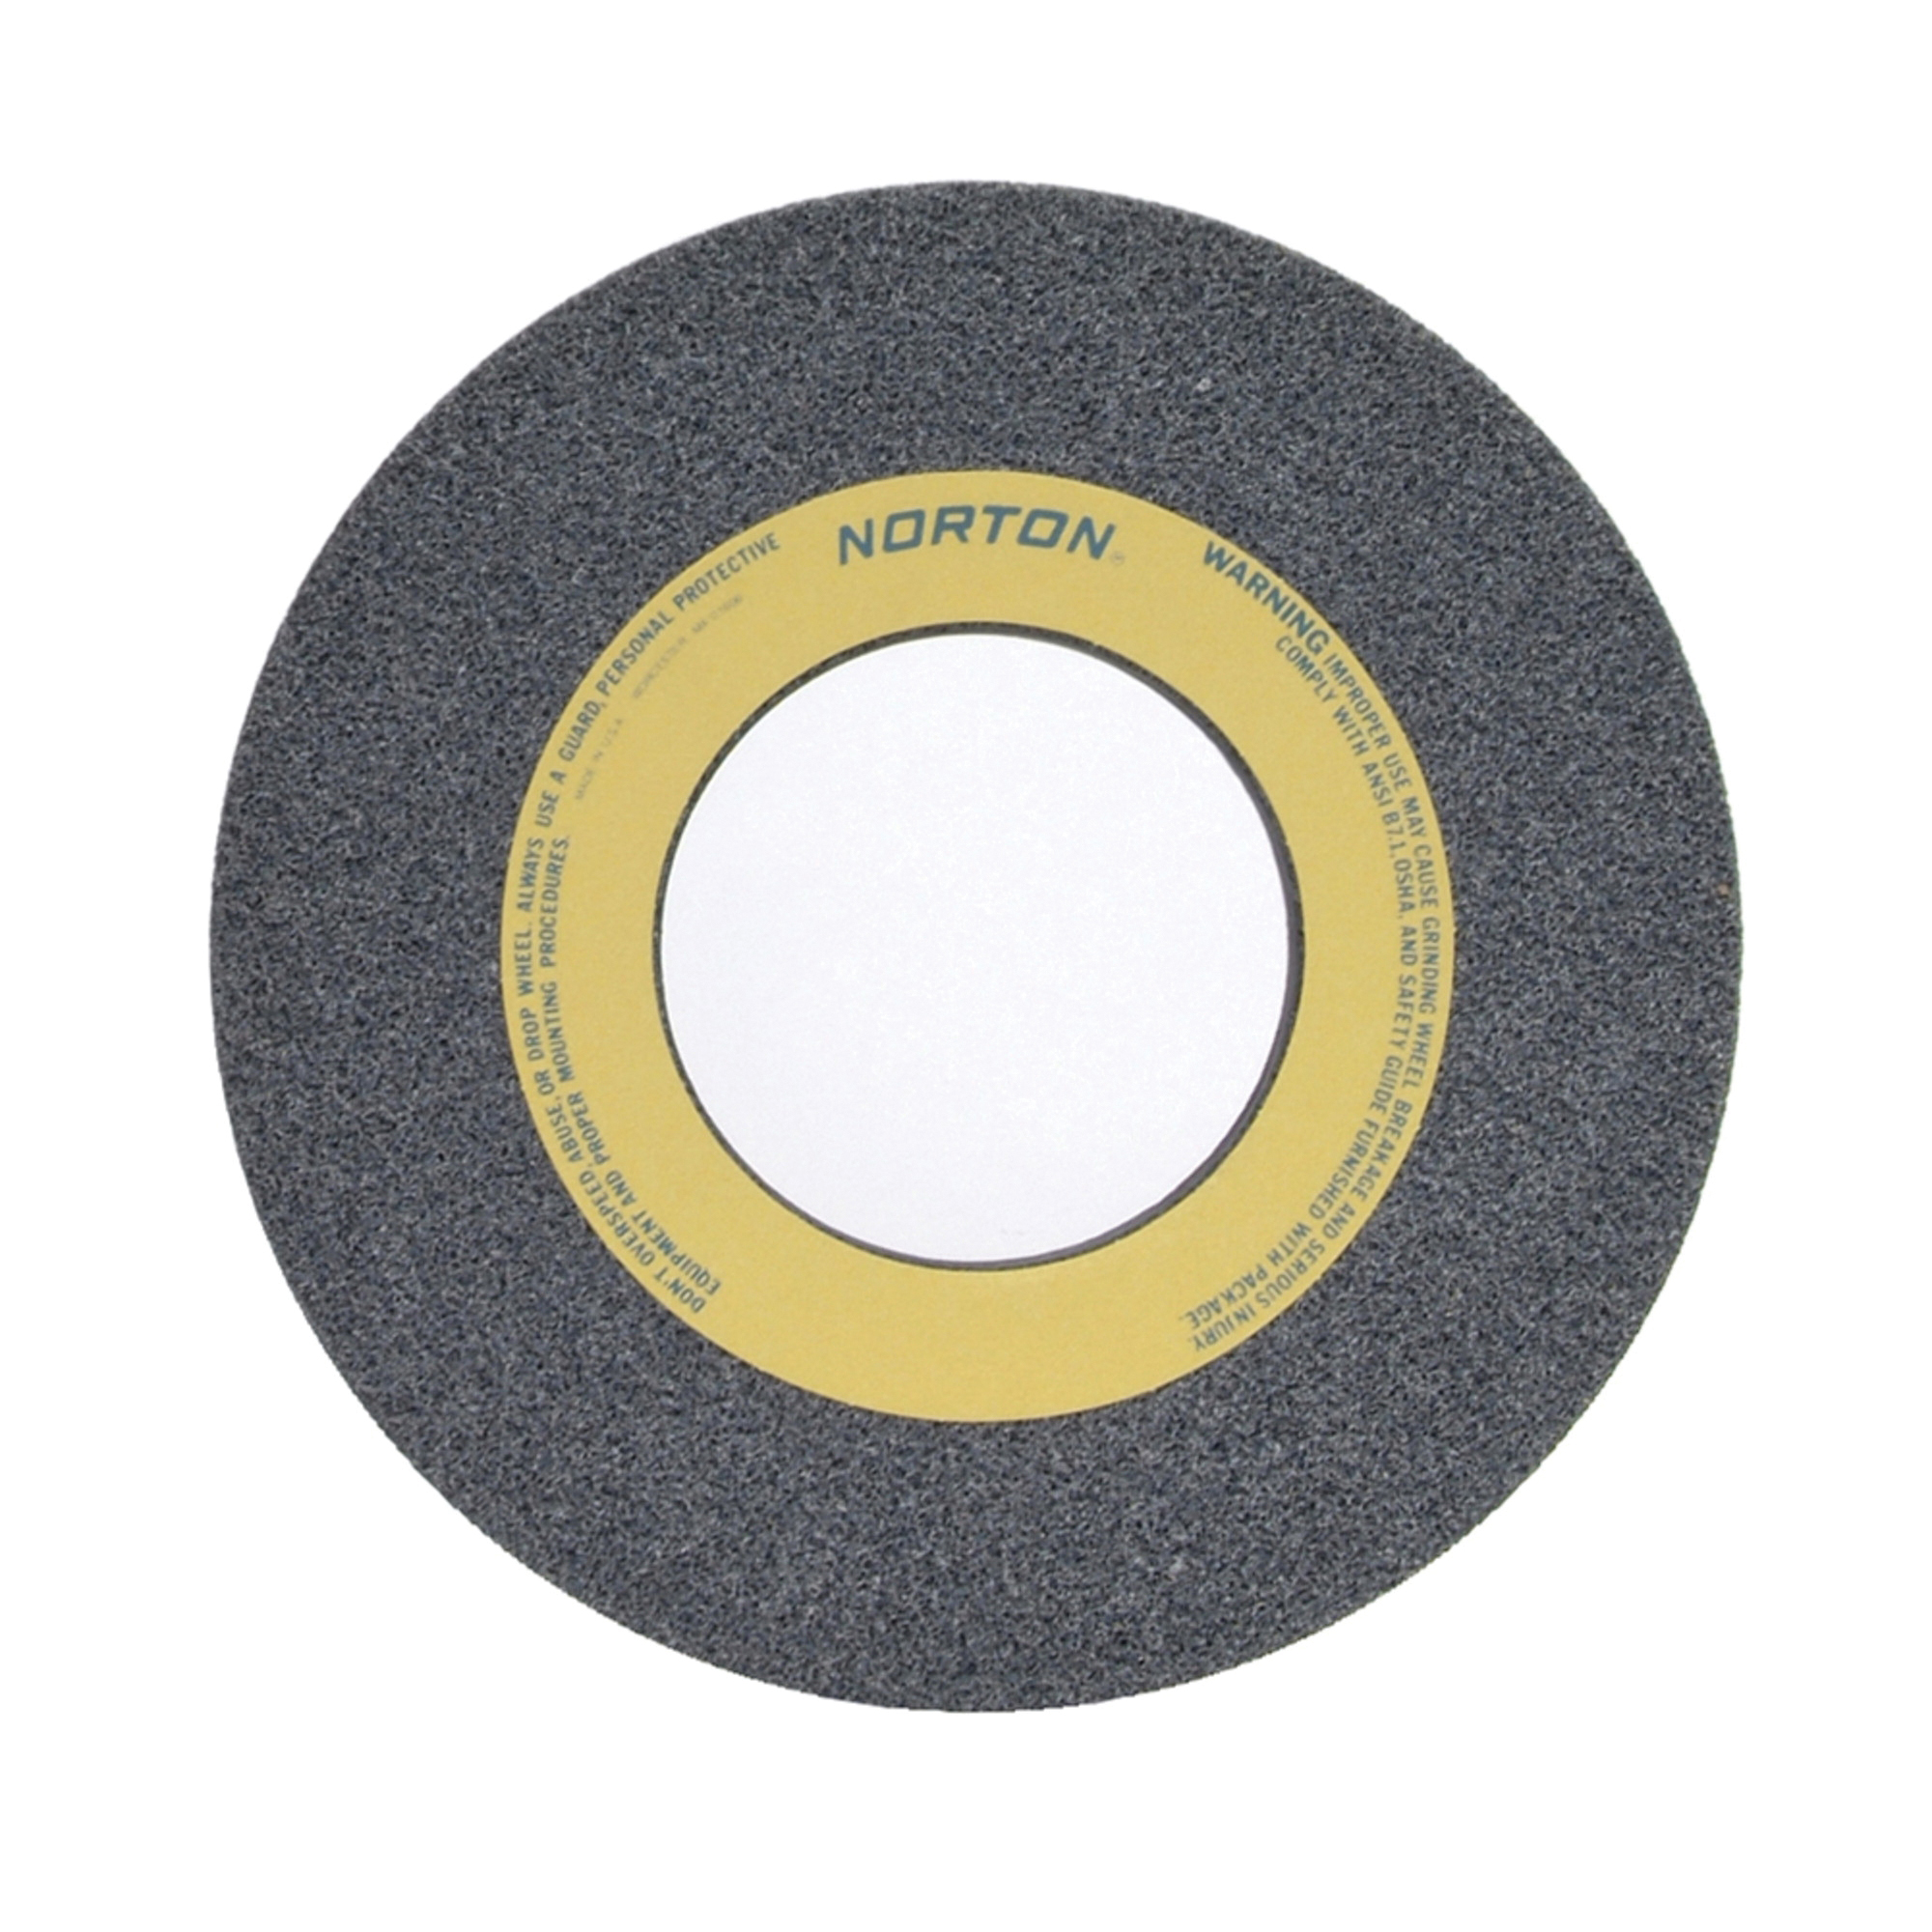 Norton® 66253364336 32A Straight Toolroom Wheel, 14 in Dia x 1-1/2 in THK, 5 in Center Hole, 46 Grit, Aluminum Oxide Abrasive